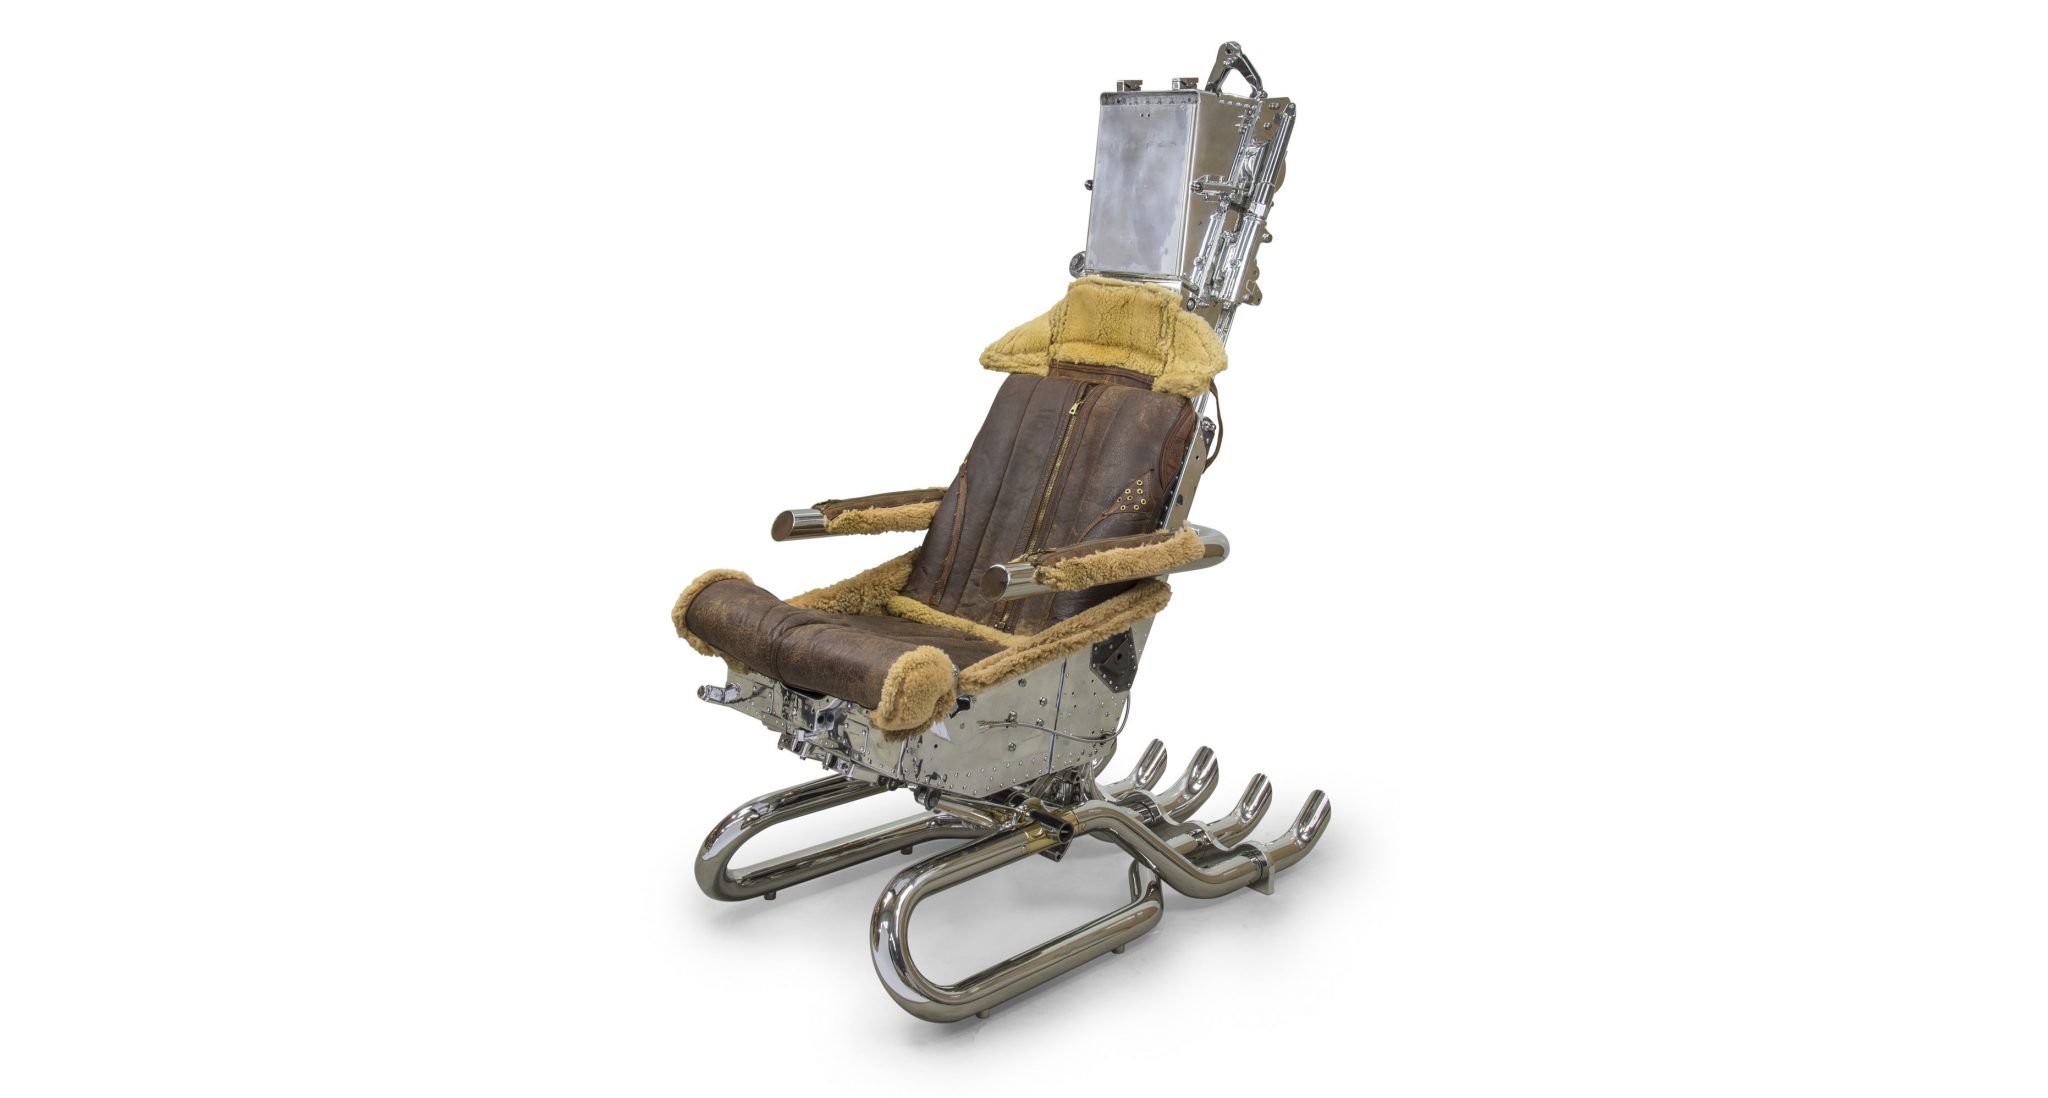 ejector seat